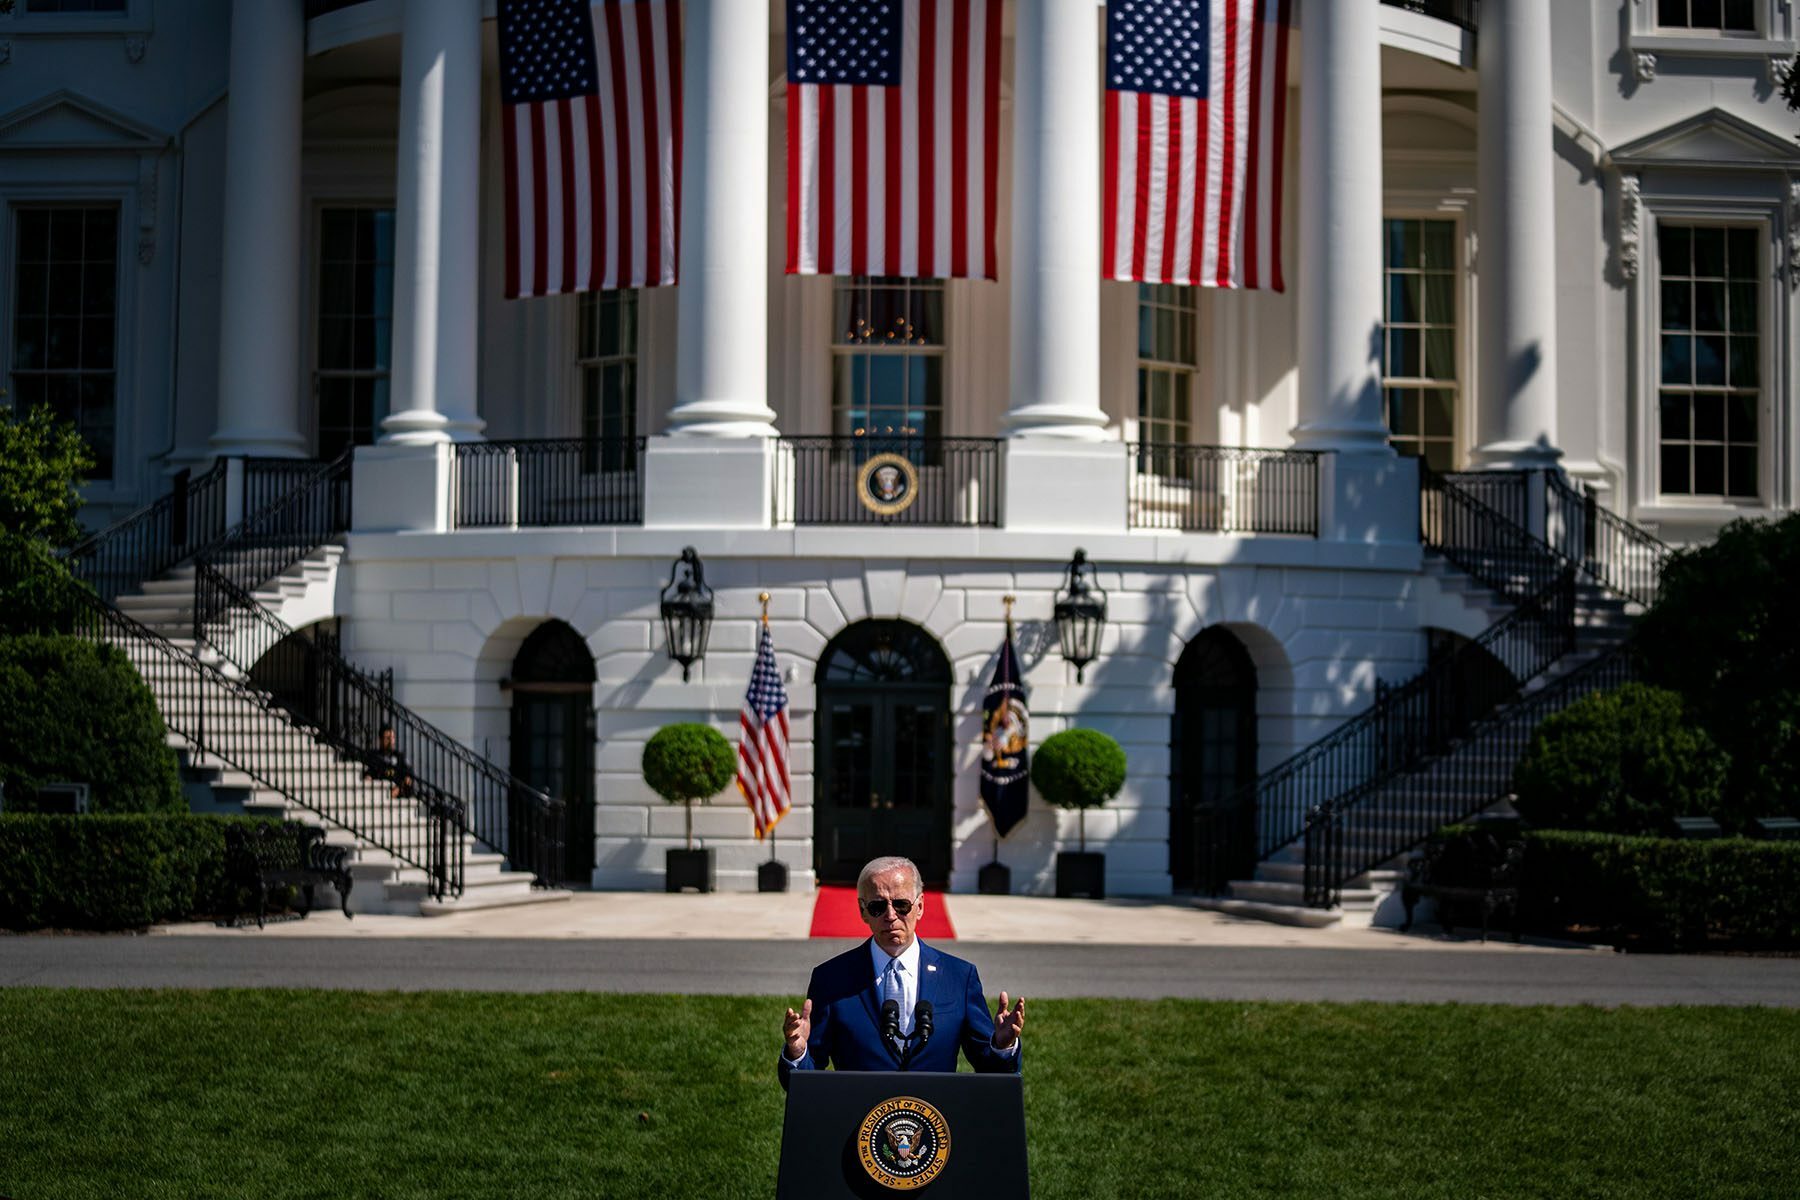 President Biden delivers remarks from the South Lawn of the White House.